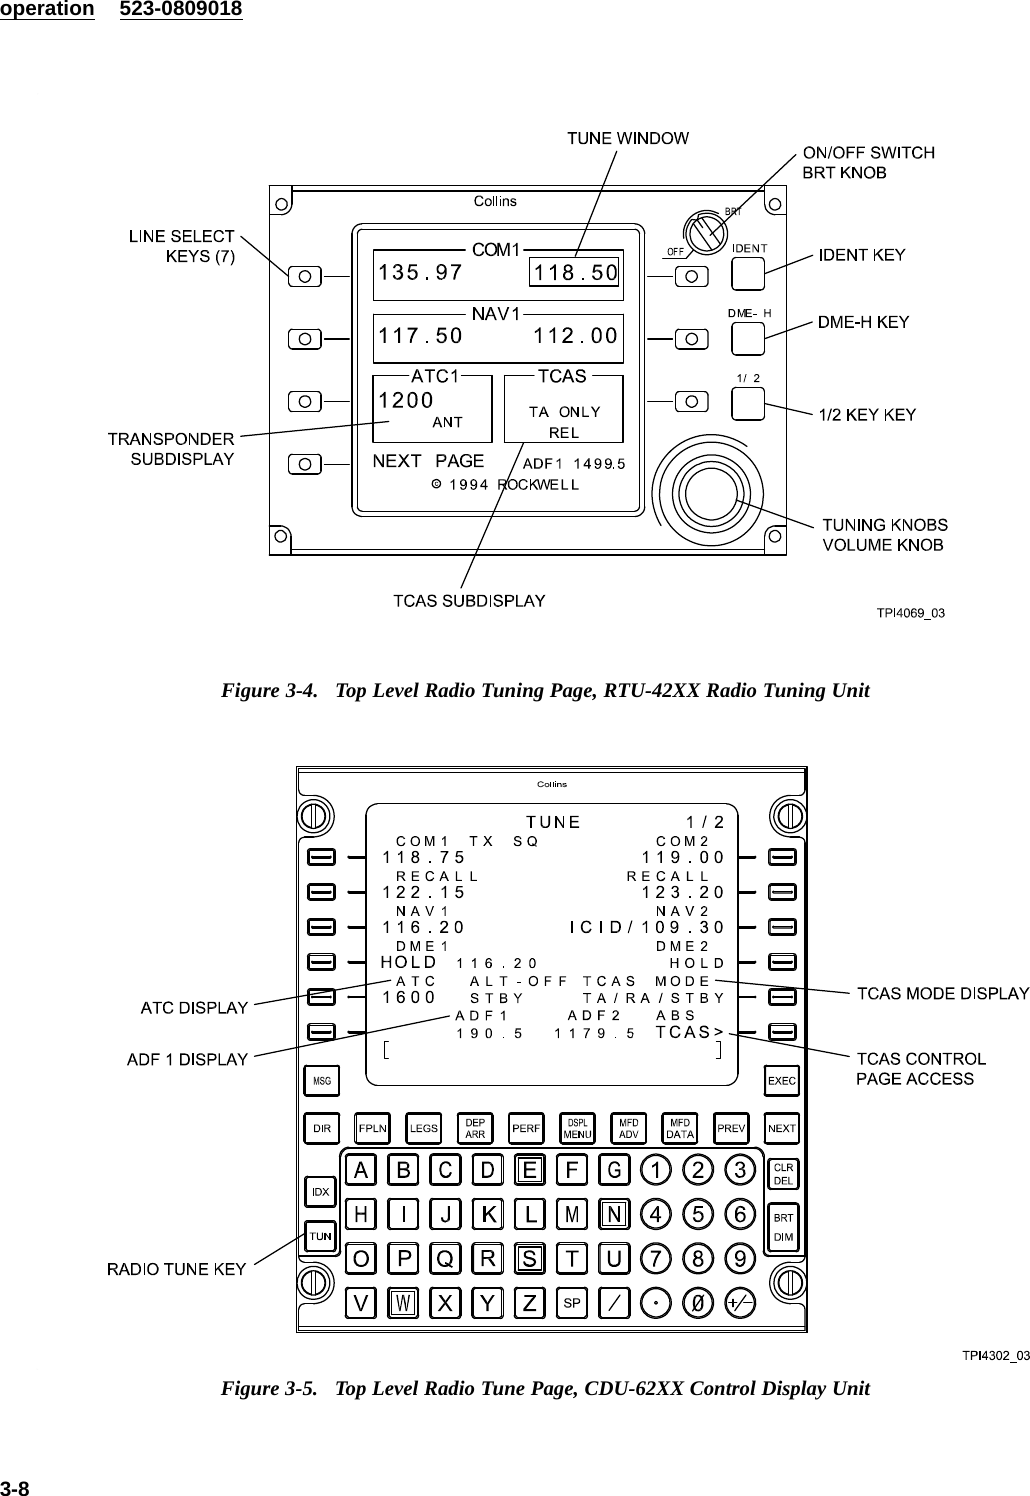 operation 523-0809018Figure 3-4. Top Level Radio Tuning Page, RTU-42XX Radio Tuning UnitFigure 3-5. Top Level Radio Tune Page, CDU-62XX Control Display Unit3-8